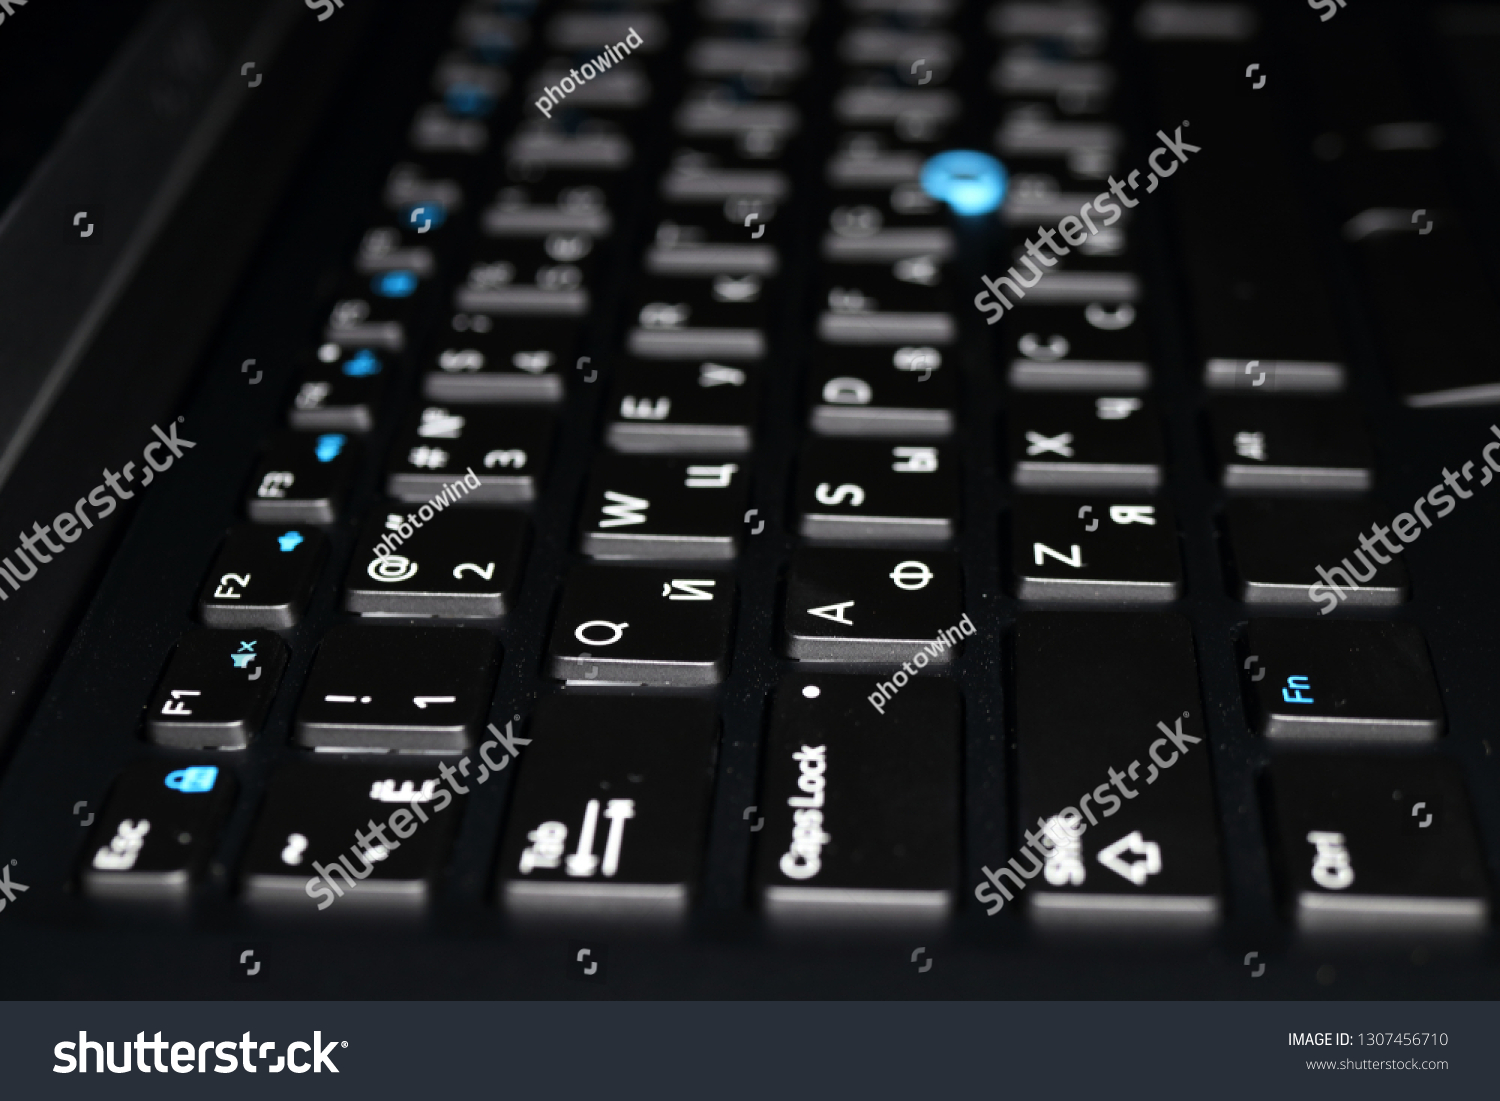 Modern laptop keyboard with a pointing stick #1307456710